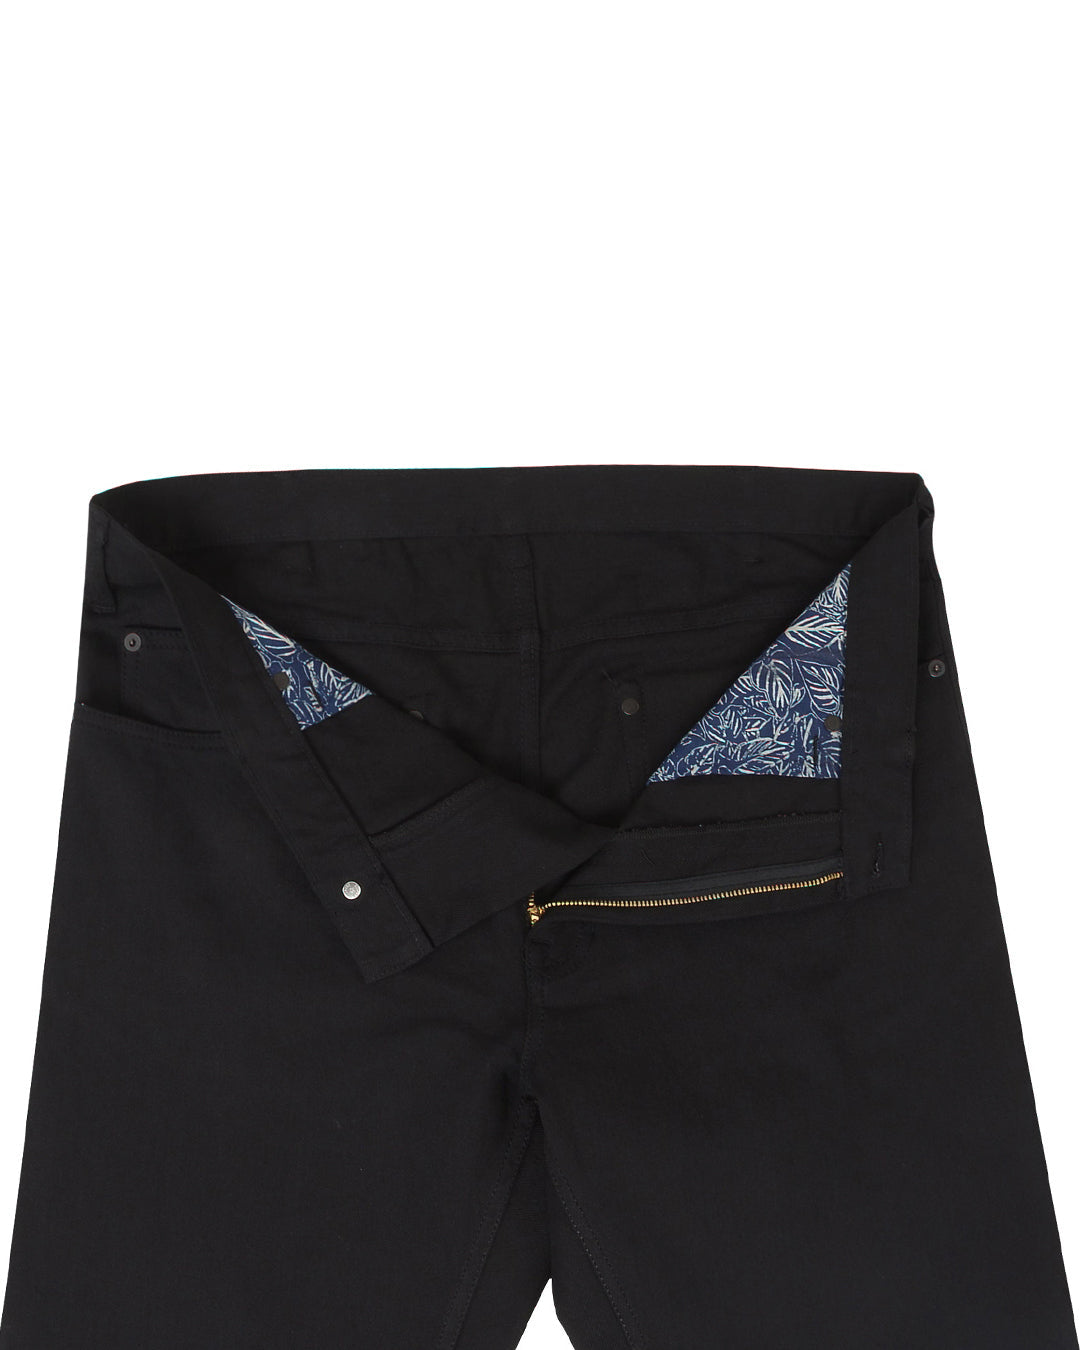 Front open view of mens jeans by Luxire in black